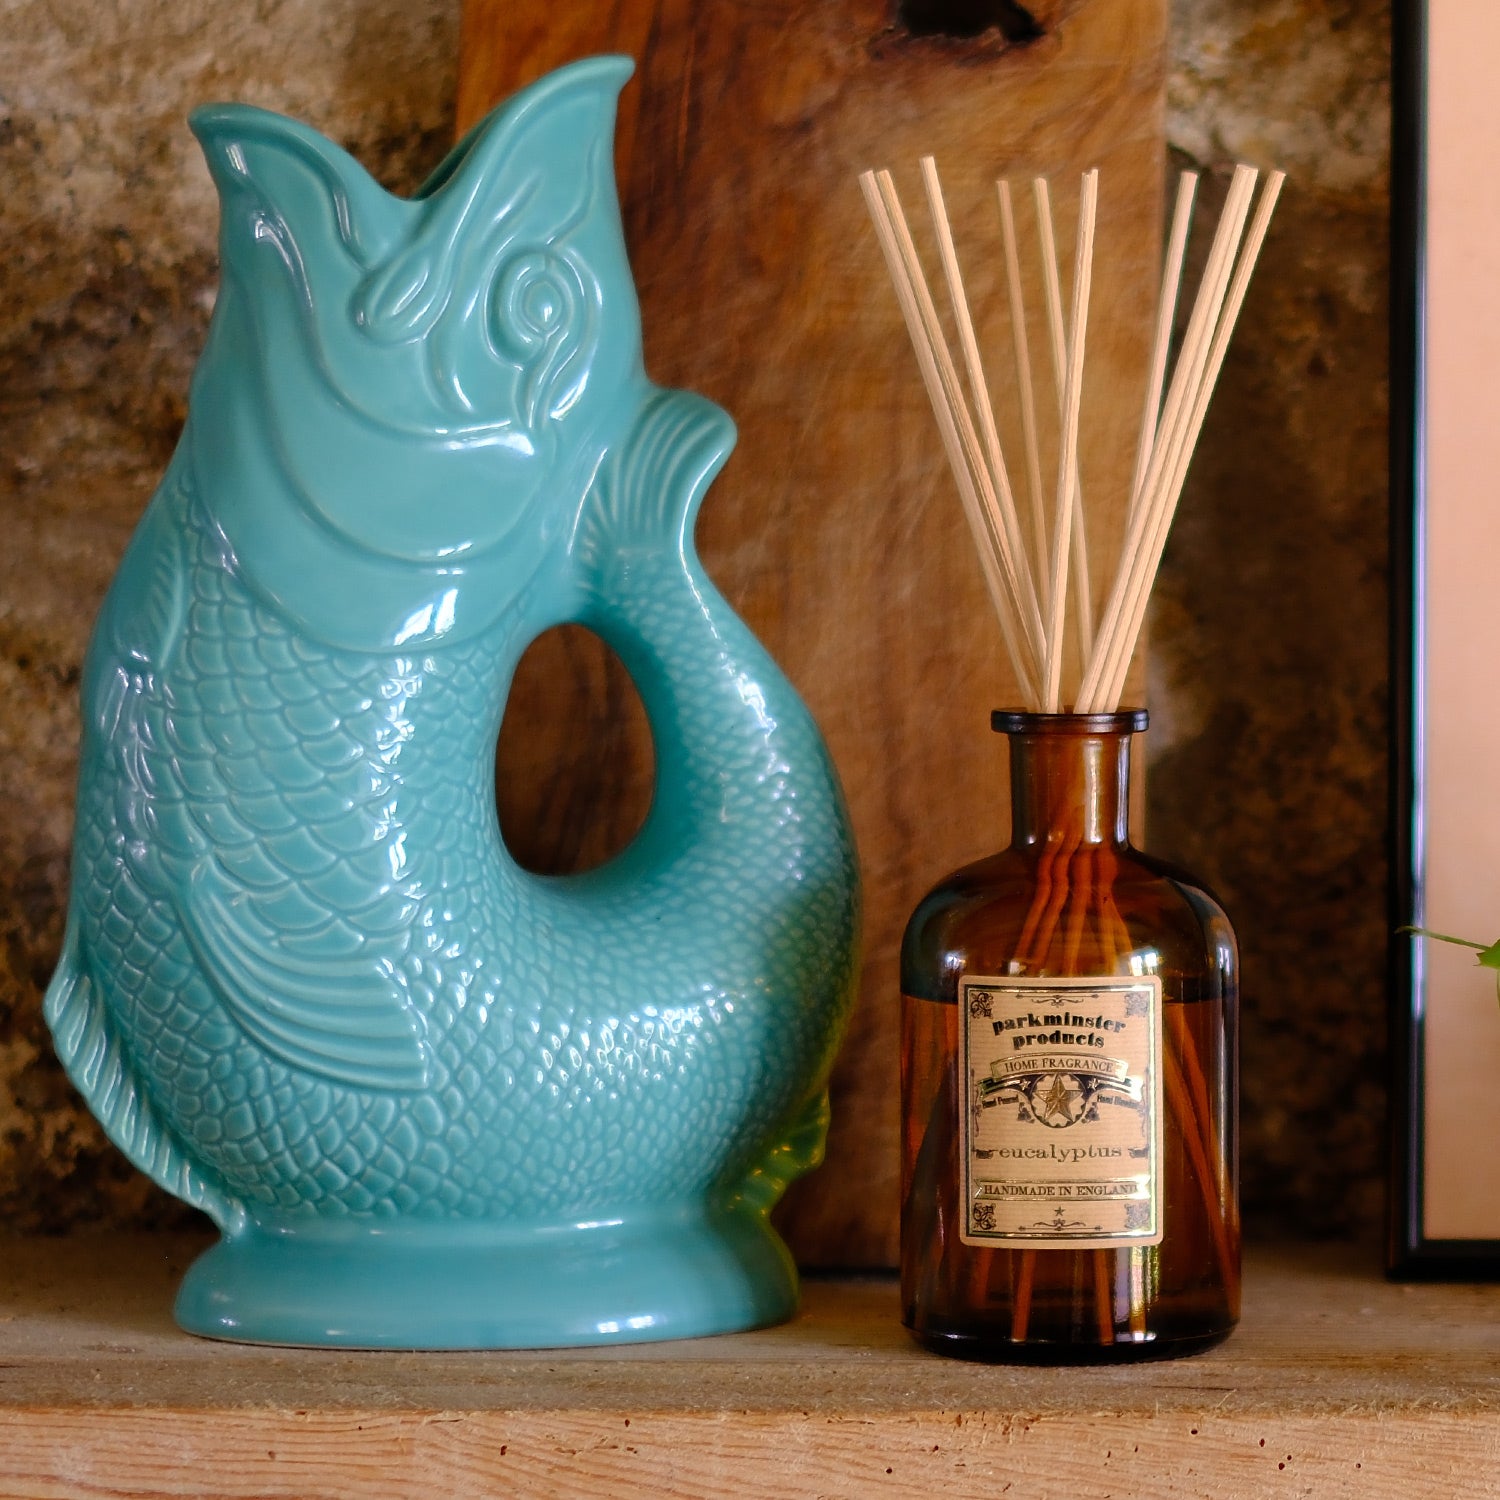 Parkminster Home Fragrance Eucalyptus Reed Diffuser, 200ml bottle with 100% essential oil, offering a refreshing aroma, handcrafted in Cornwall, Apothecary Collection